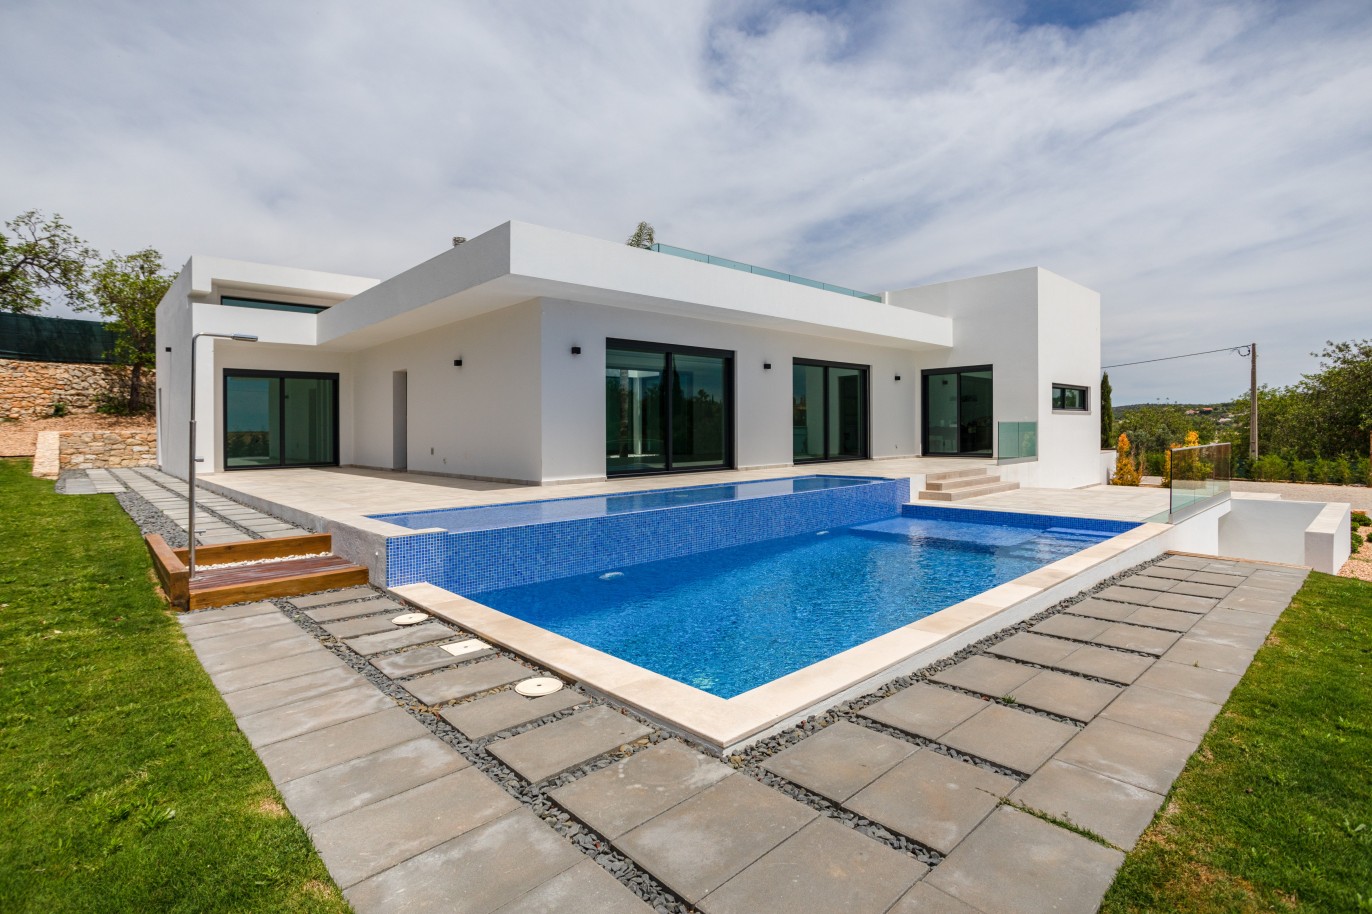 4+1 Bedroom Villa with pool and sea view, for sale in Loulé, Algarve_225774